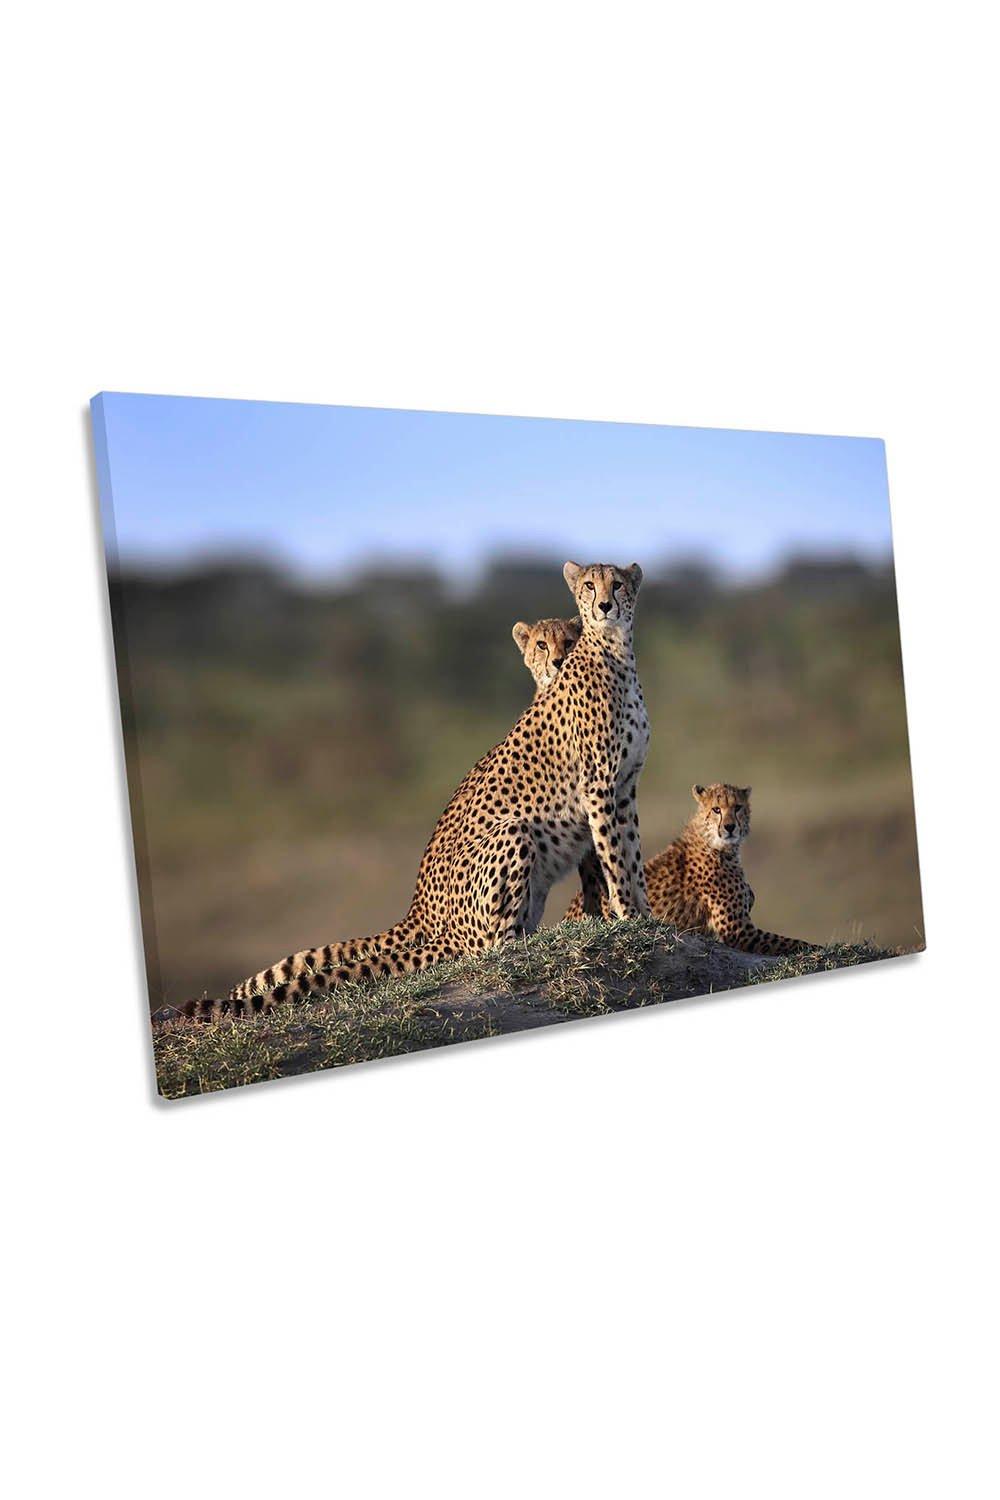 Cheetah Family Wildlife Canvas Wall Art Picture Print